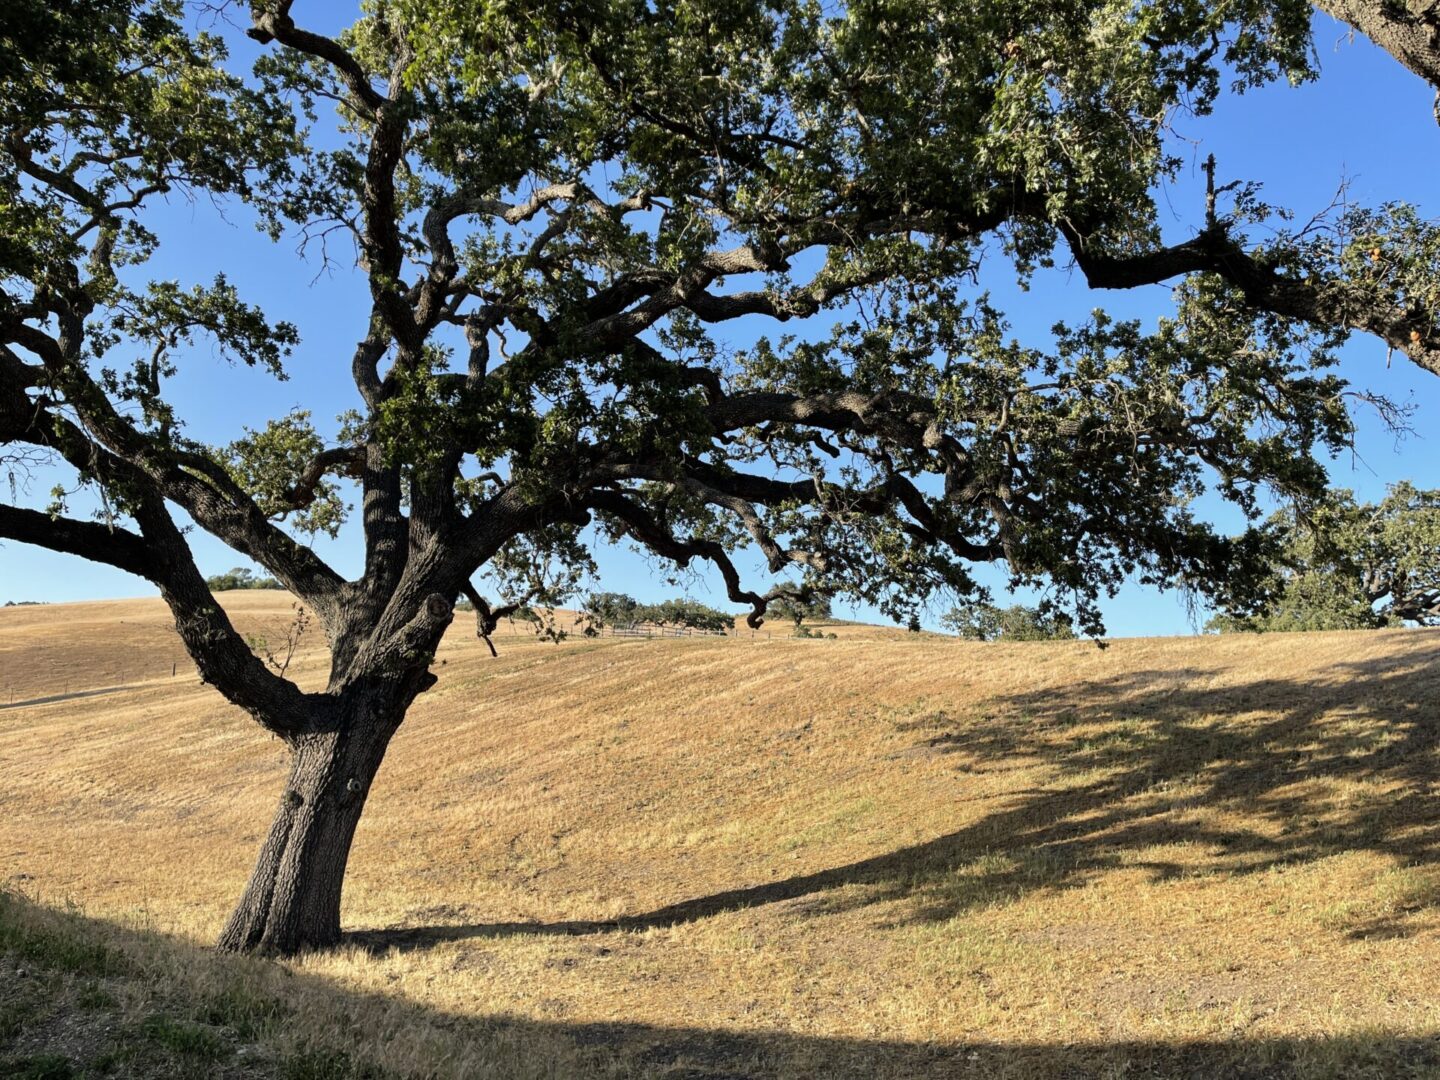 Our real estate company draws inspiration from the California Black Oak, the reigning monarch of the West Coast. Towering up to 110 feet with a remarkable lifespan exceeding 500 years, this majestic tree captivates the landscape. A favorite among birds, bears, deer, and various wildlife, the black oak's acorns are a coveted food source.